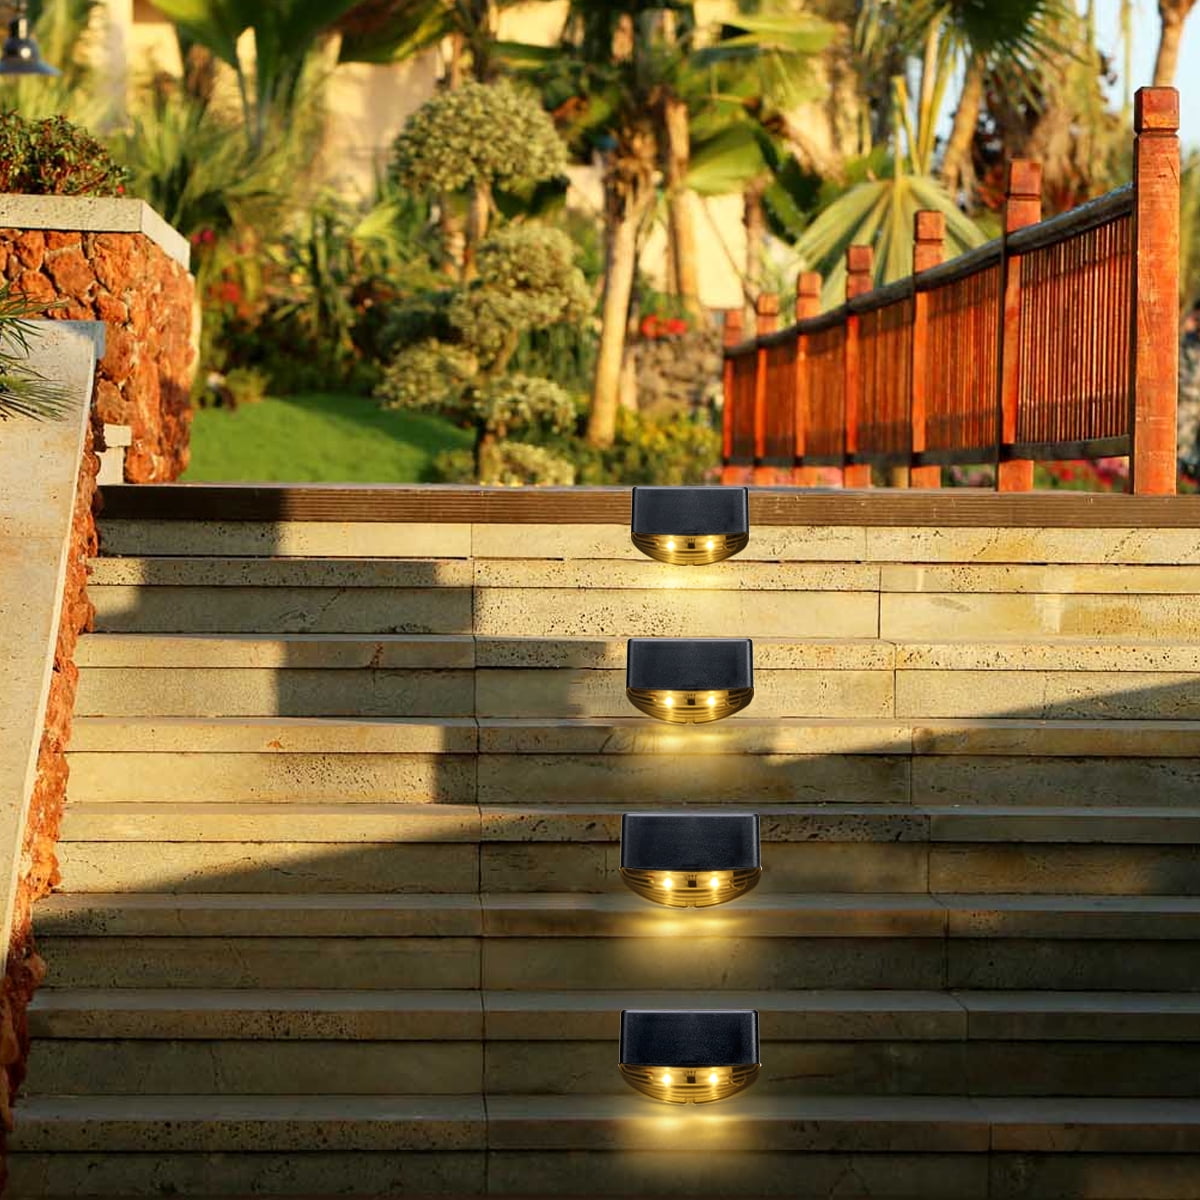 Stairs Fence Led Lamp Outdoor Pathway Patio Deck Light Yard Garden Decoration